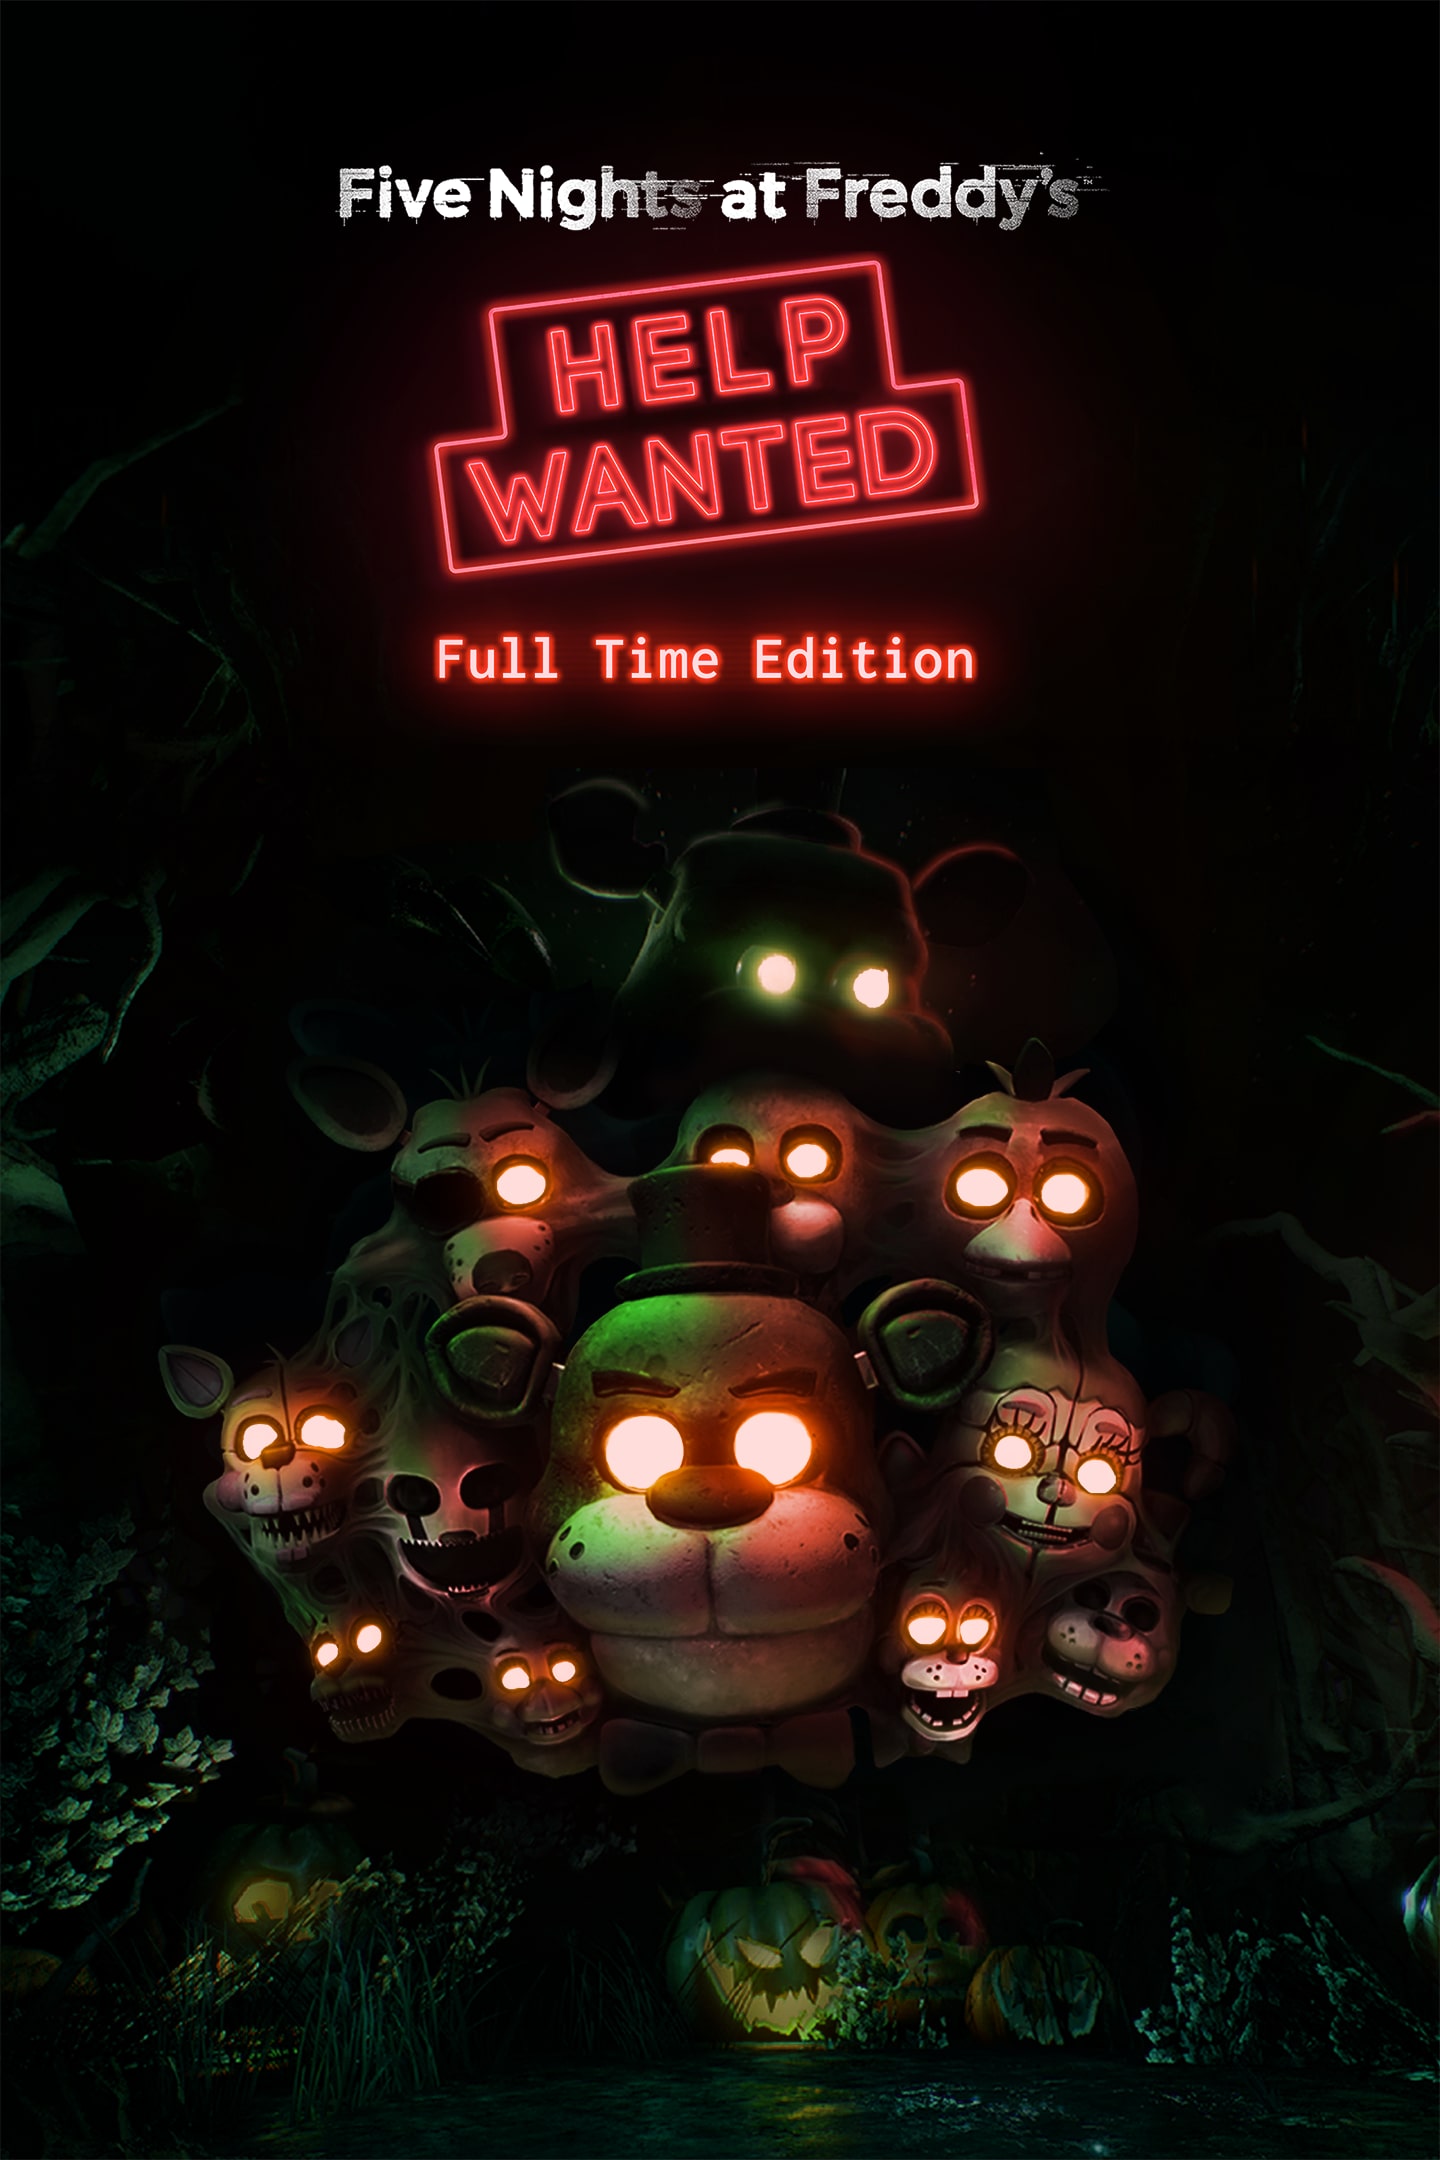 Ps4 - Five Nights at Freddy's Help Wanted Sony PlayStation 4 Brand New –  vandalsgaming